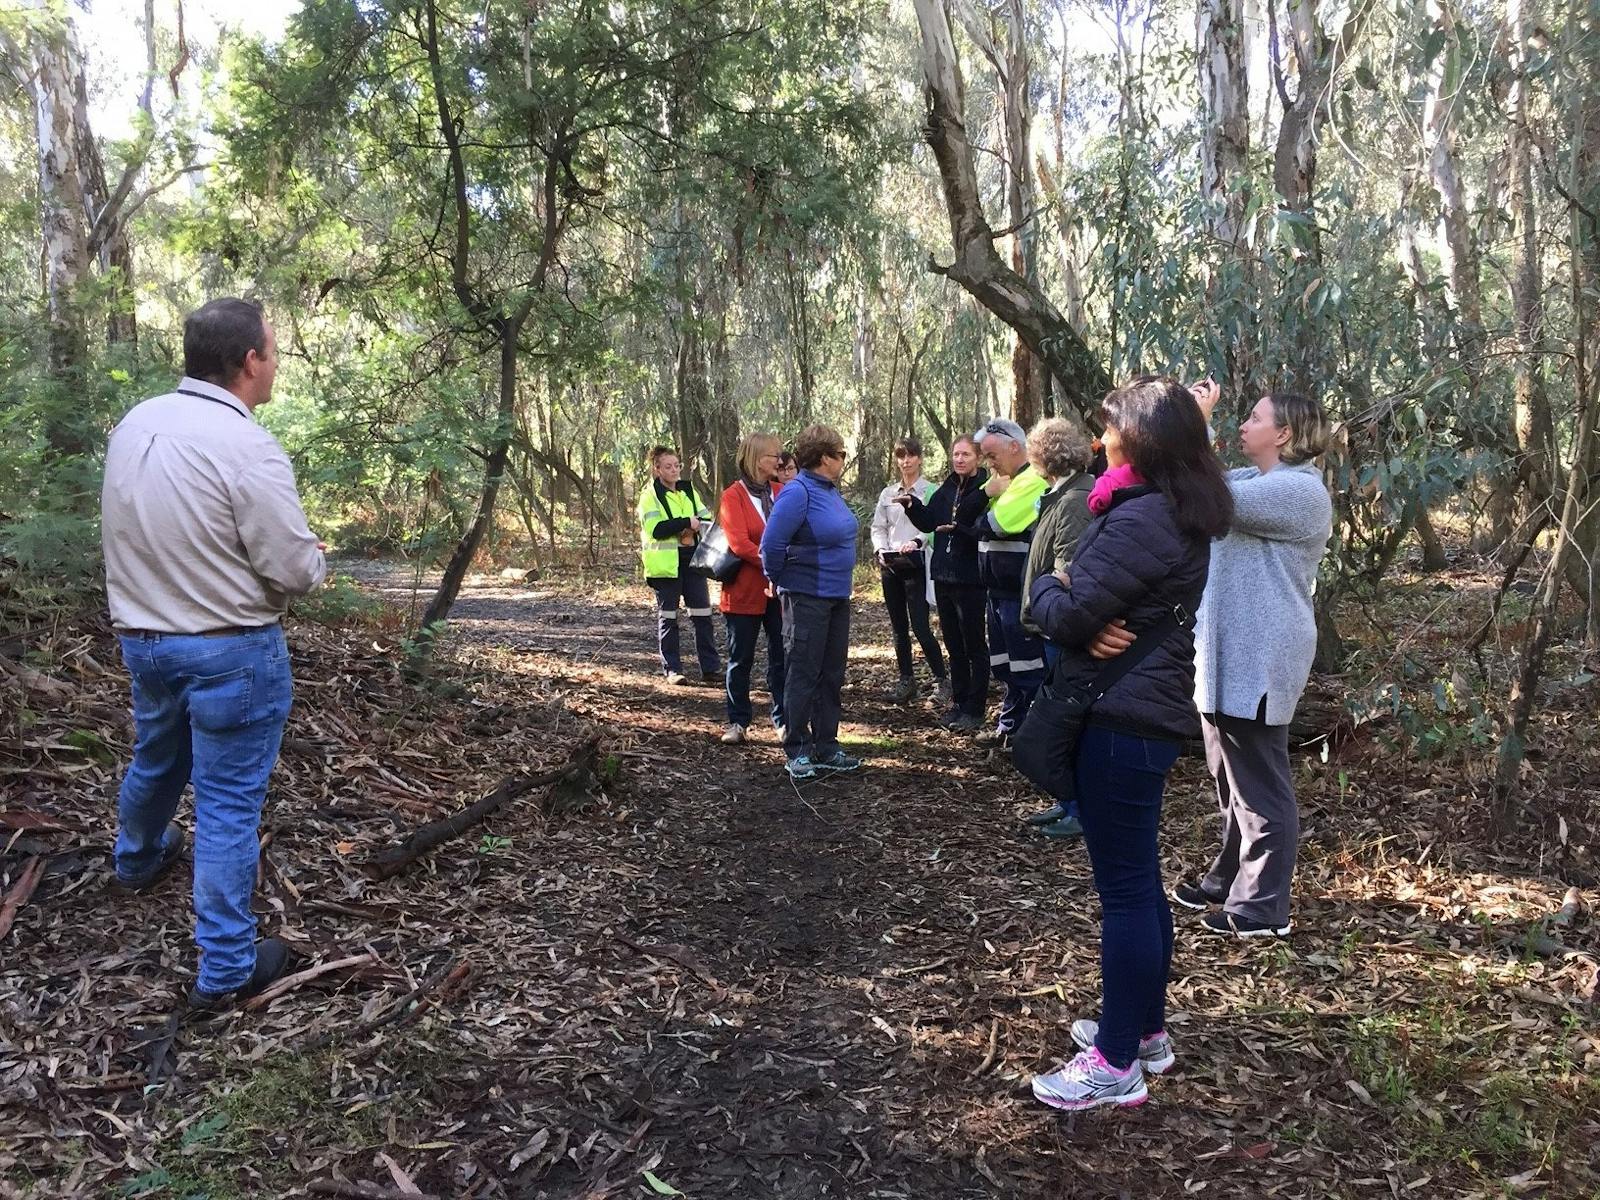 Tour Guide, group of people taking photos, gum trees, dried leaves, sunlight filtering through trees